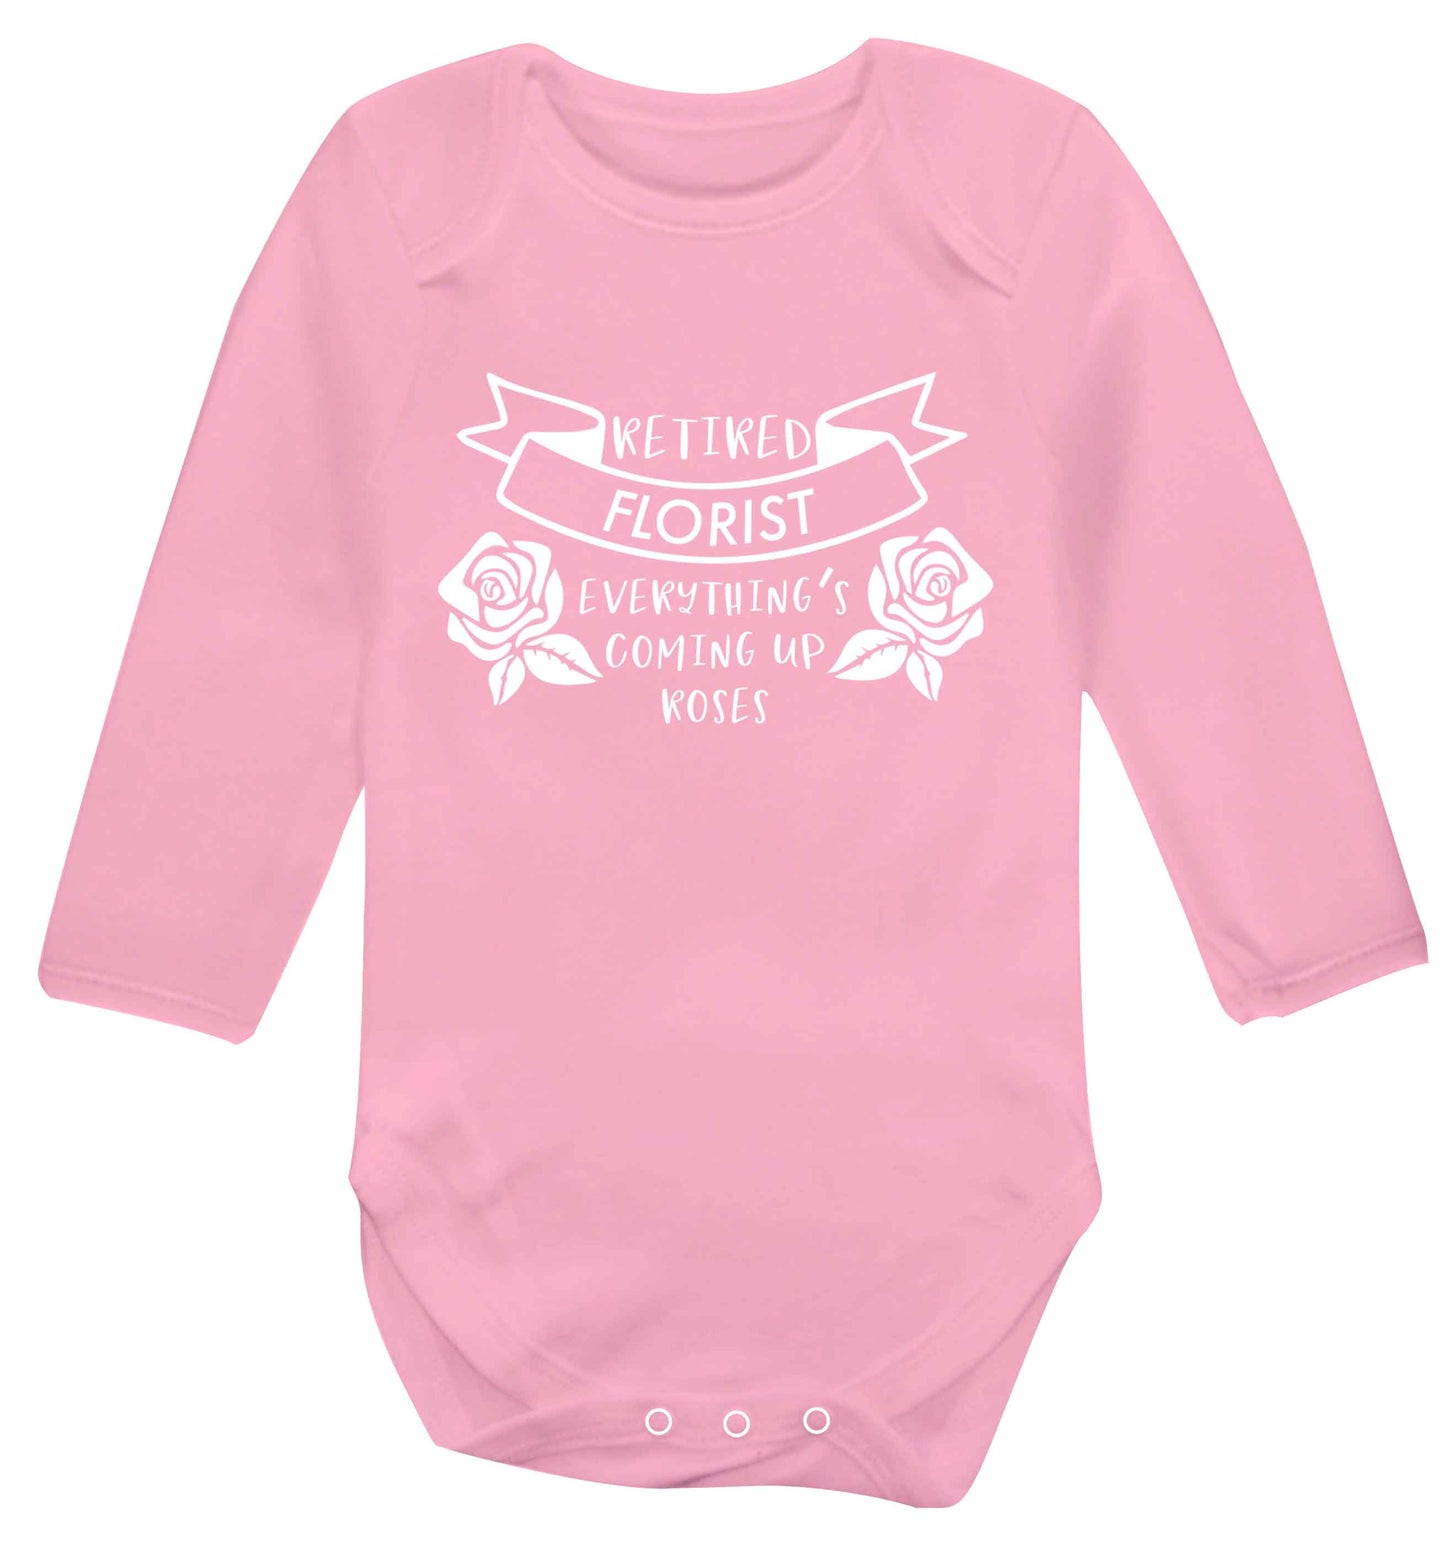 Retired florist everything's coming up roses Baby Vest long sleeved pale pink 6-12 months